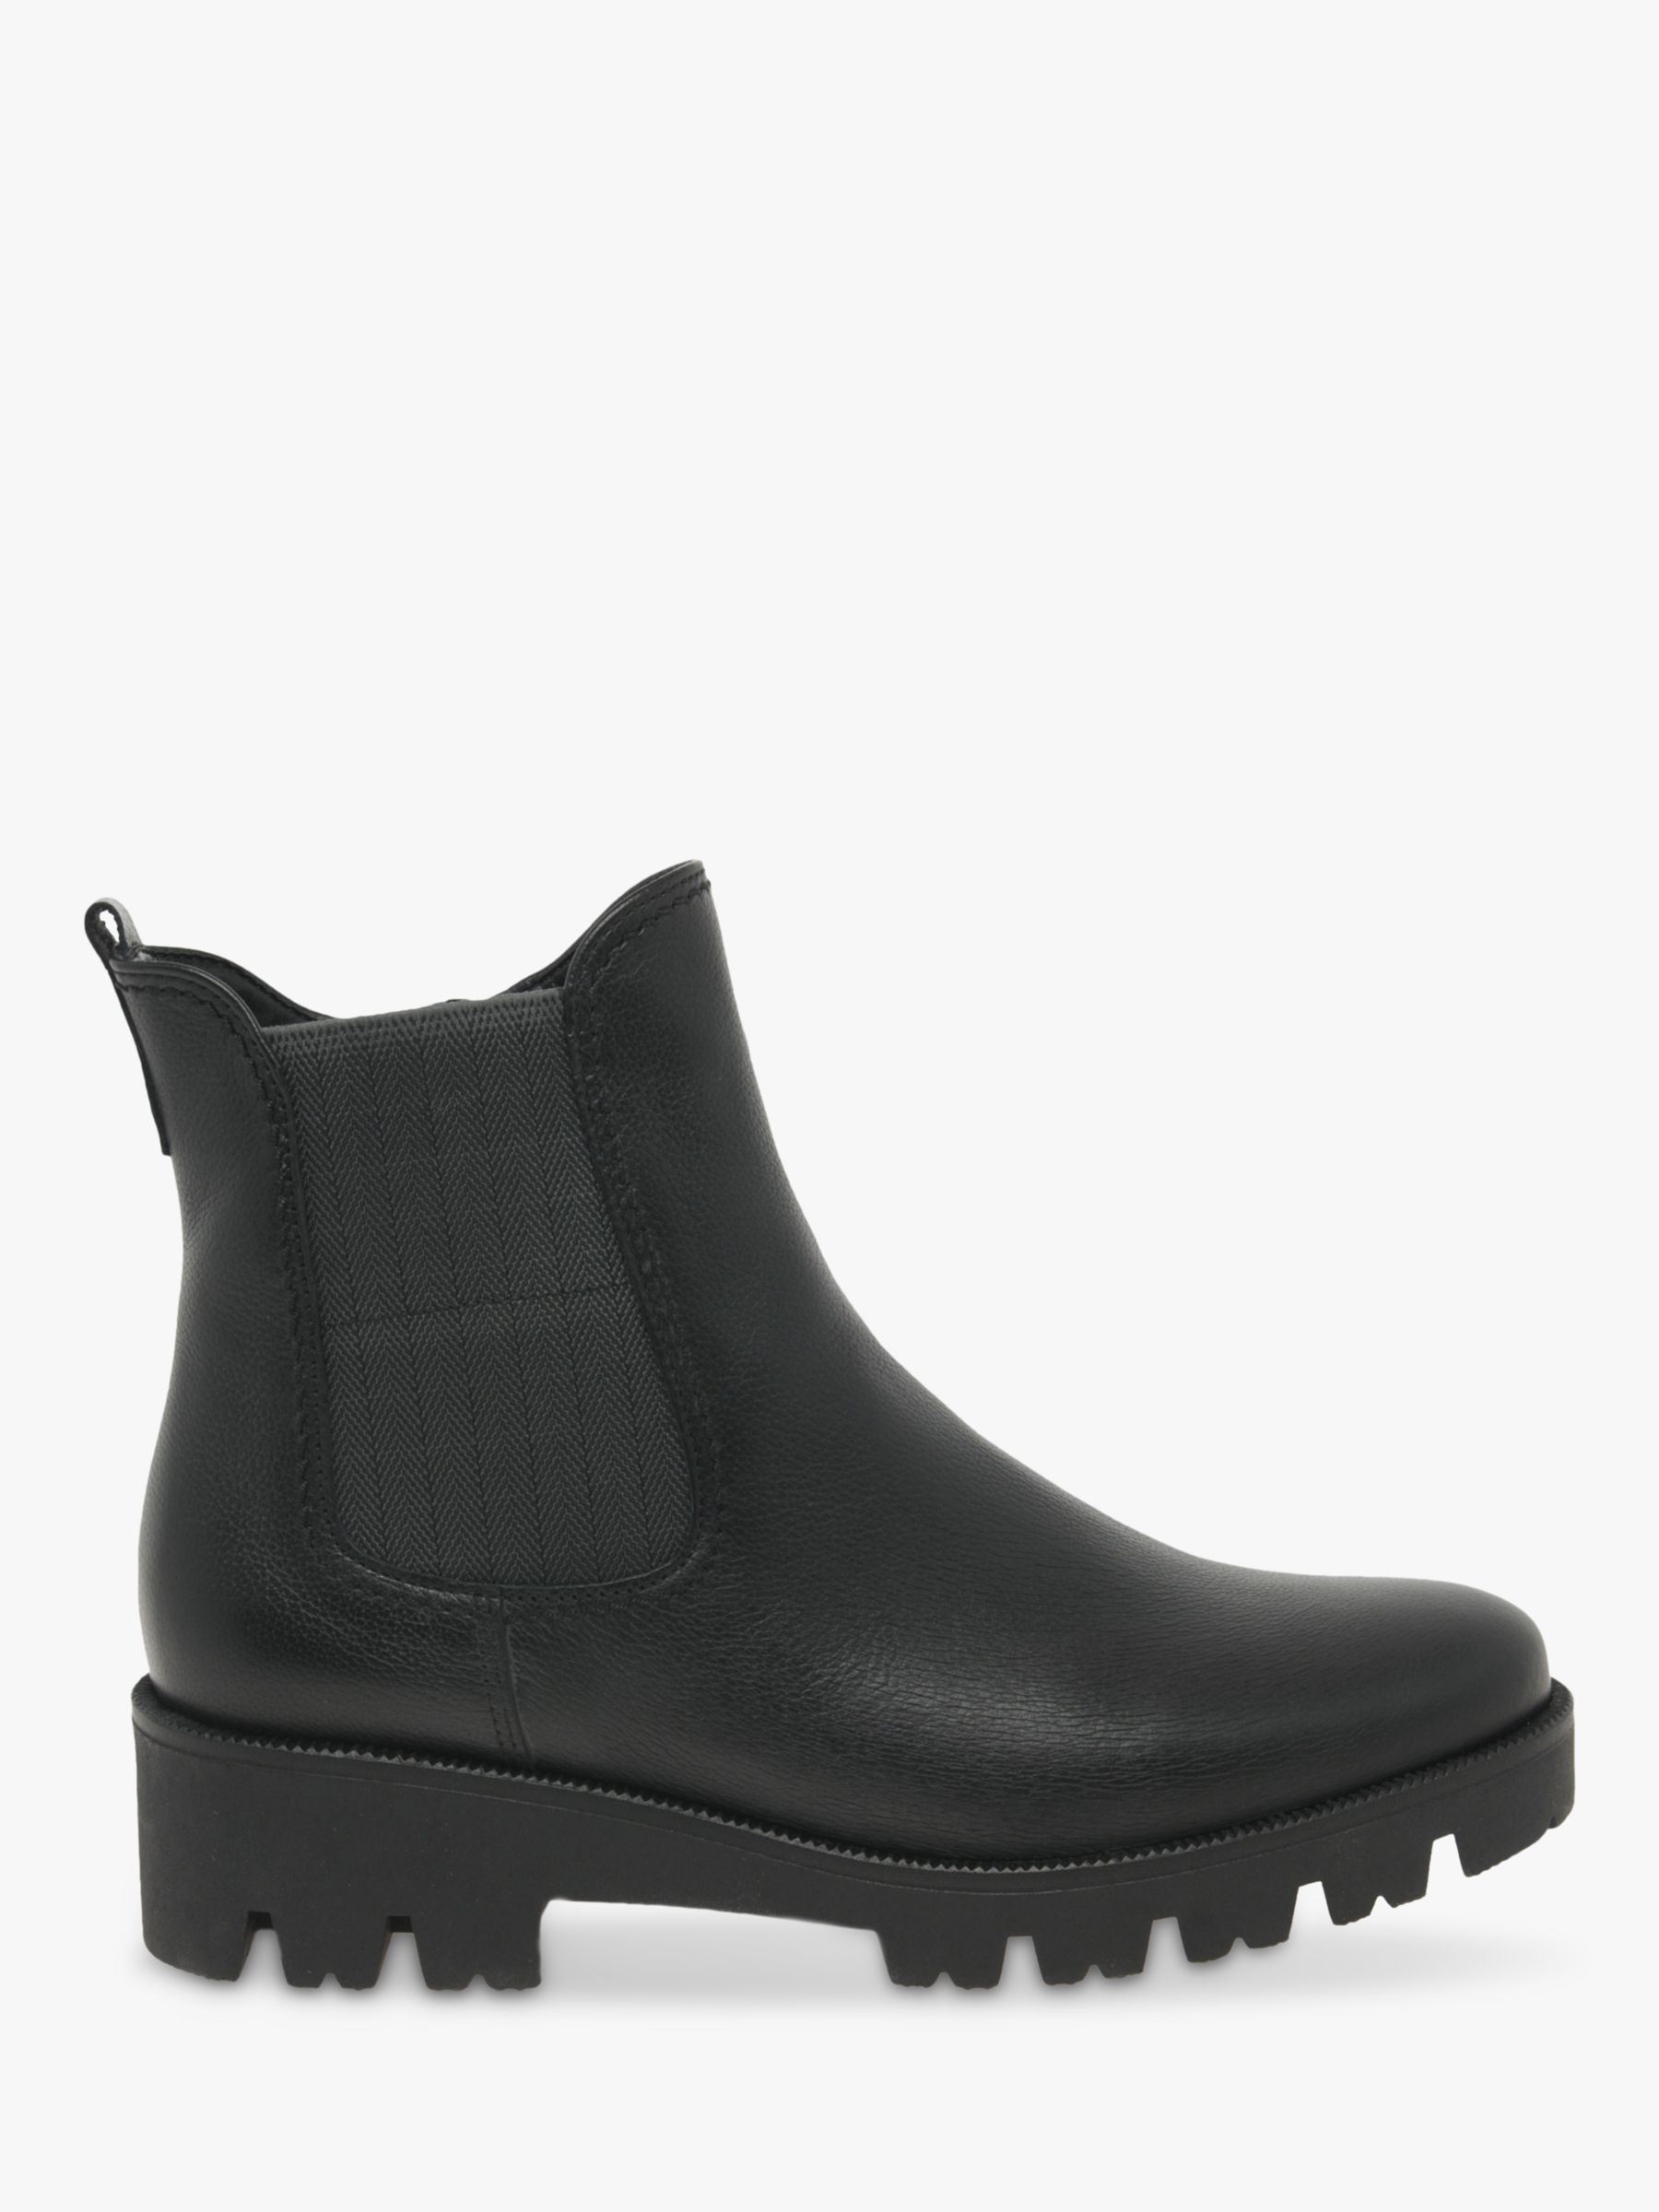 Gabor Newport Wide Fit Leather Chelsea Boots, Black at Lewis Partners